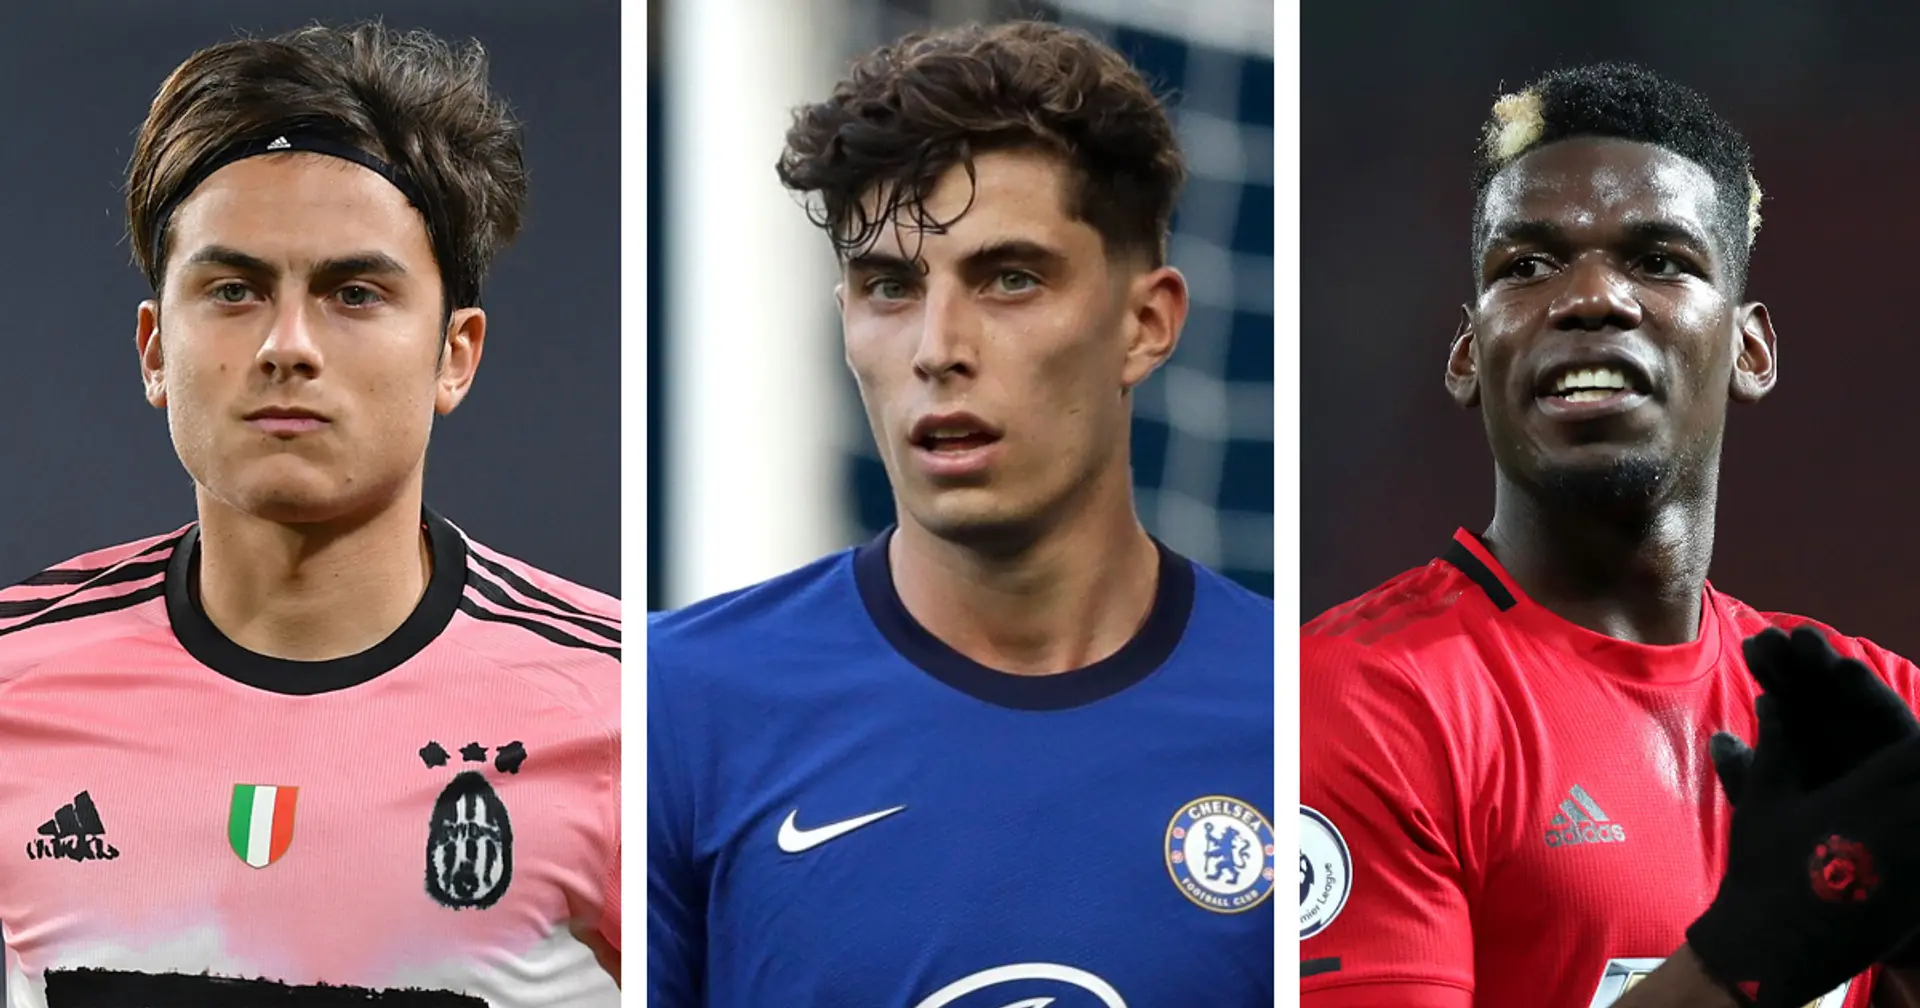 Havertz might still feel Covid-19 effects – ask Dybala, Pogba & 3 more stars to see how coronavirus affects footballers